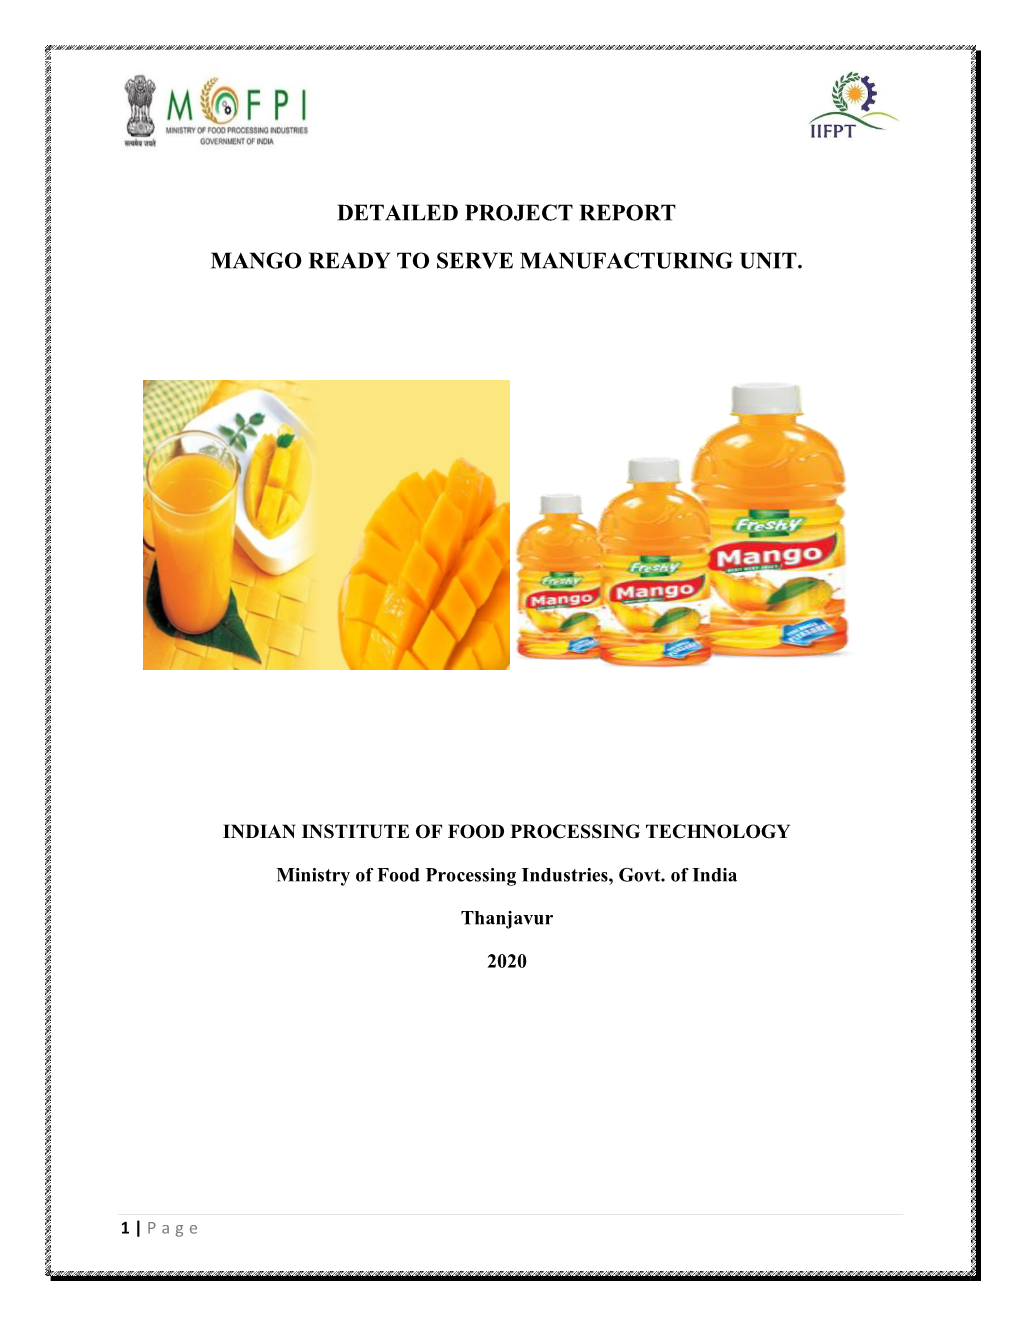 Detailed Project Report Mango Ready to Serve